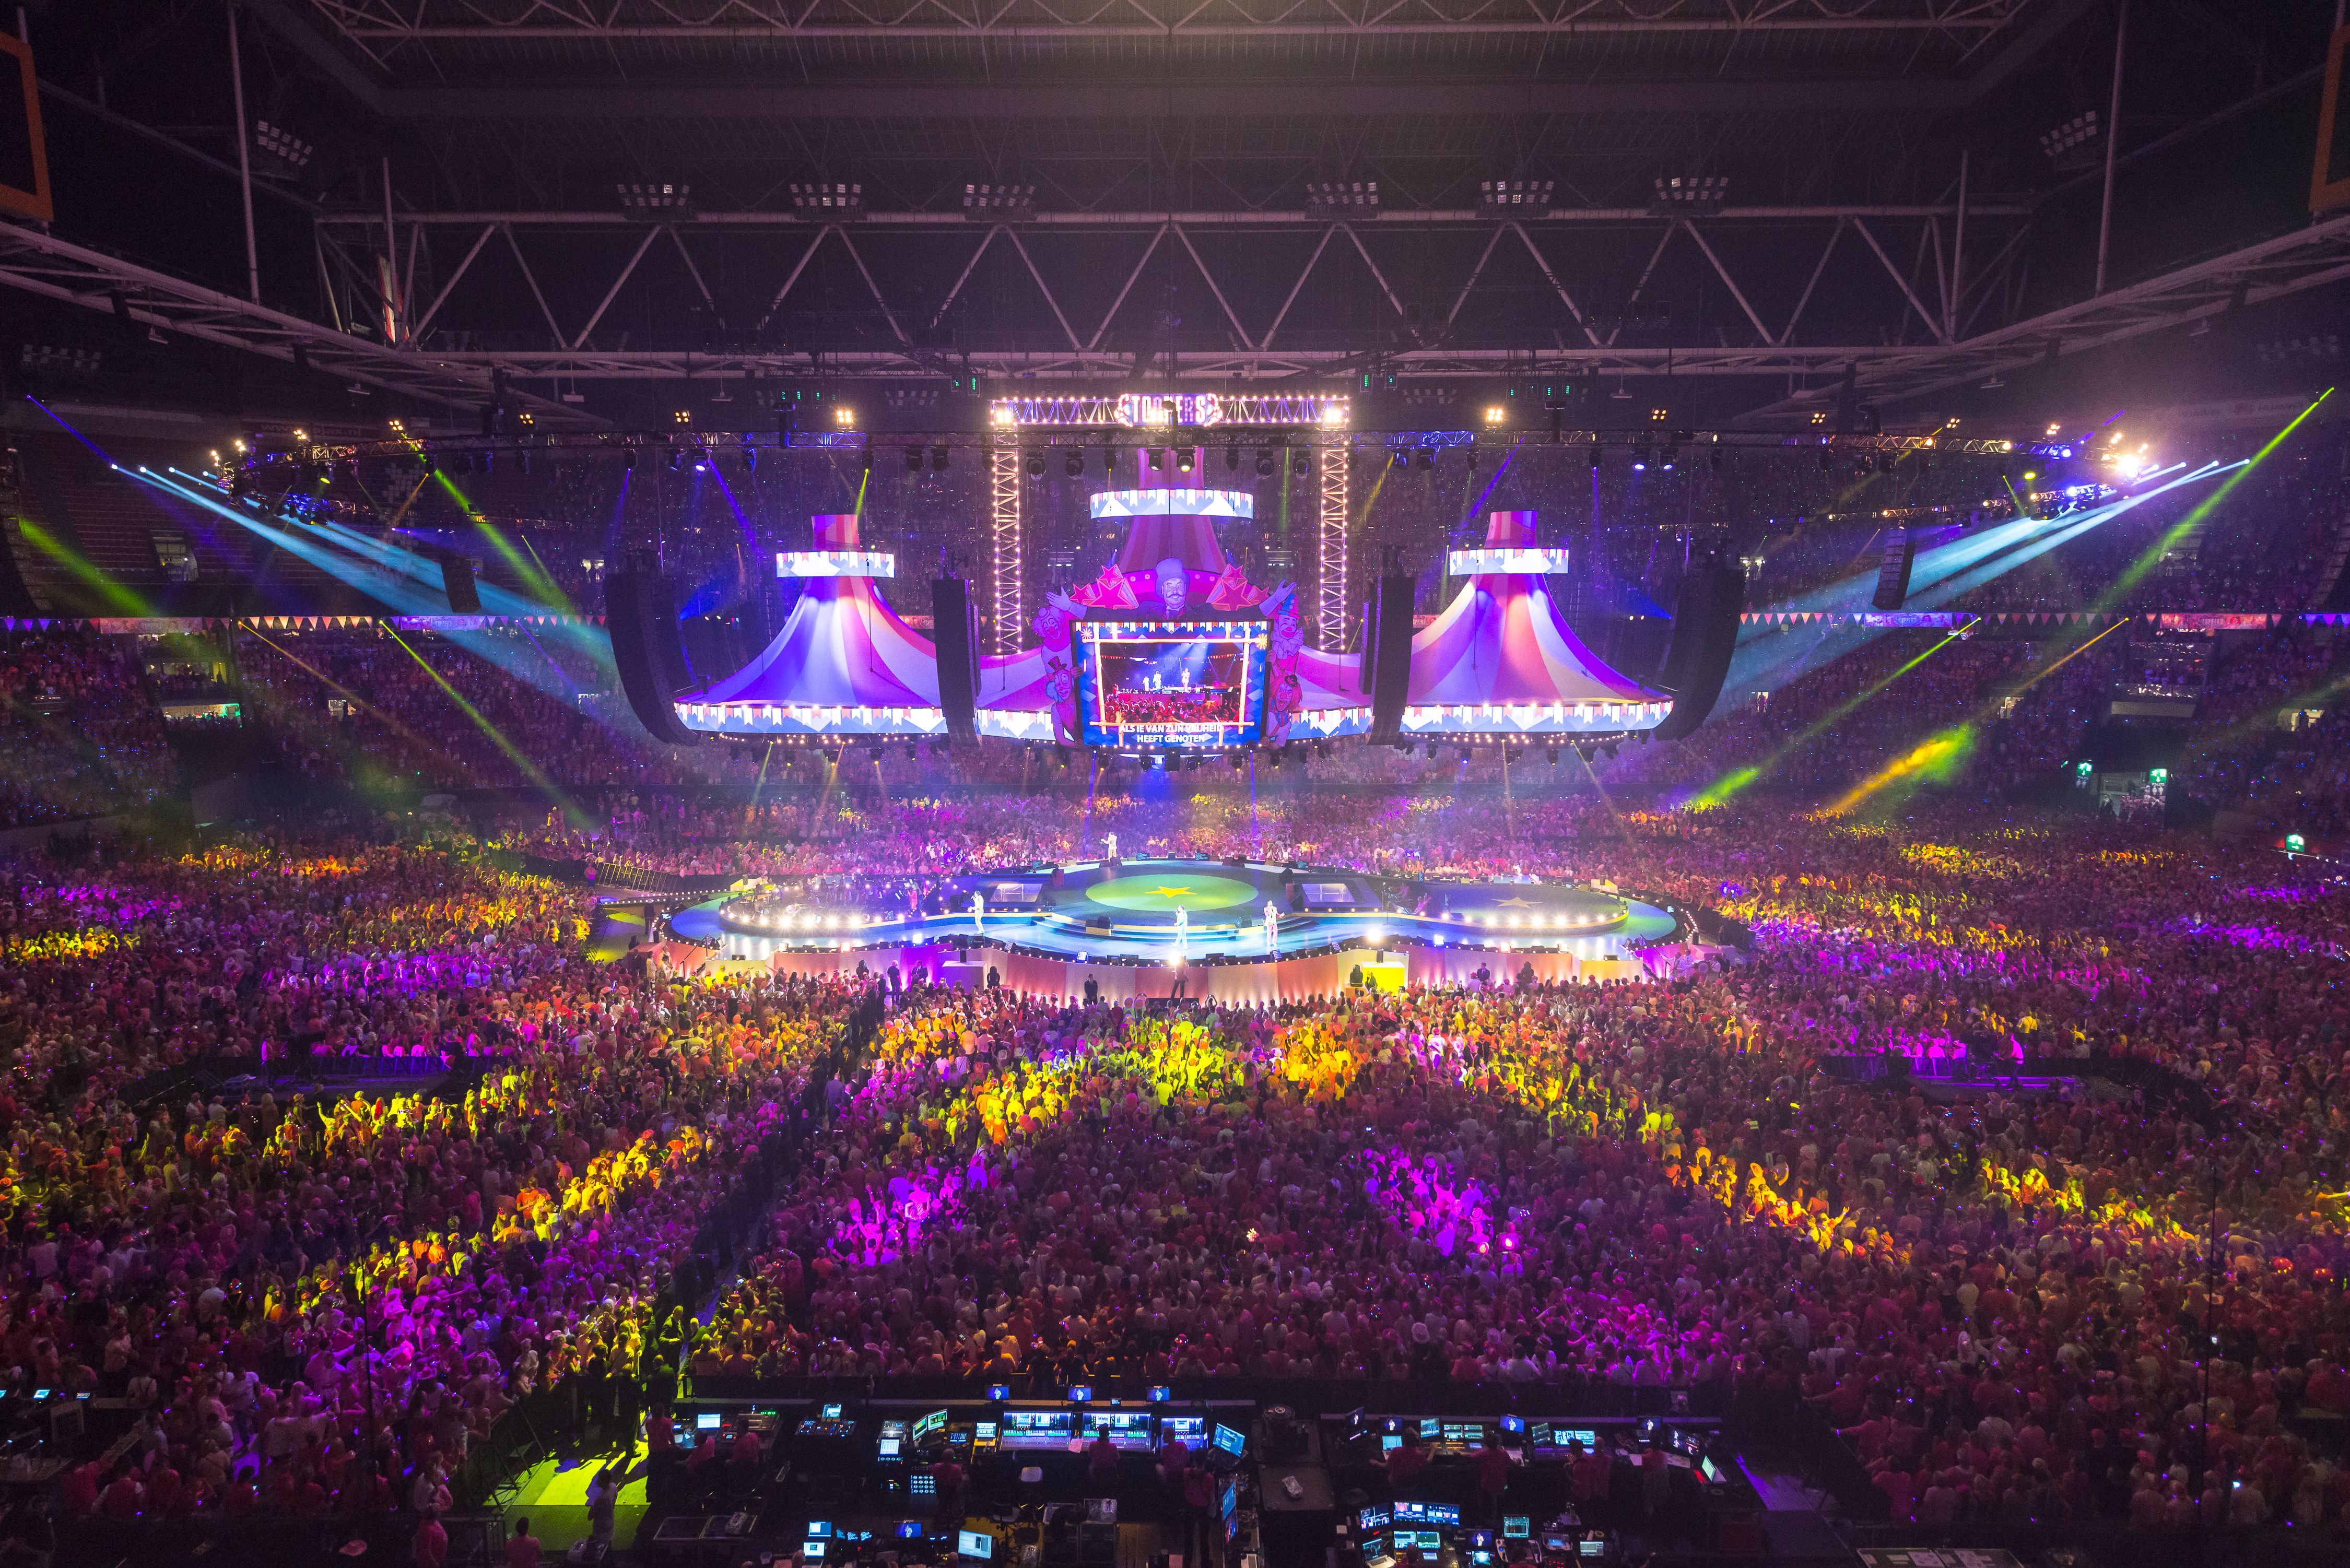 De Toppers Take Over Amsterdam Arena with Adamson & Ampco Flashlight